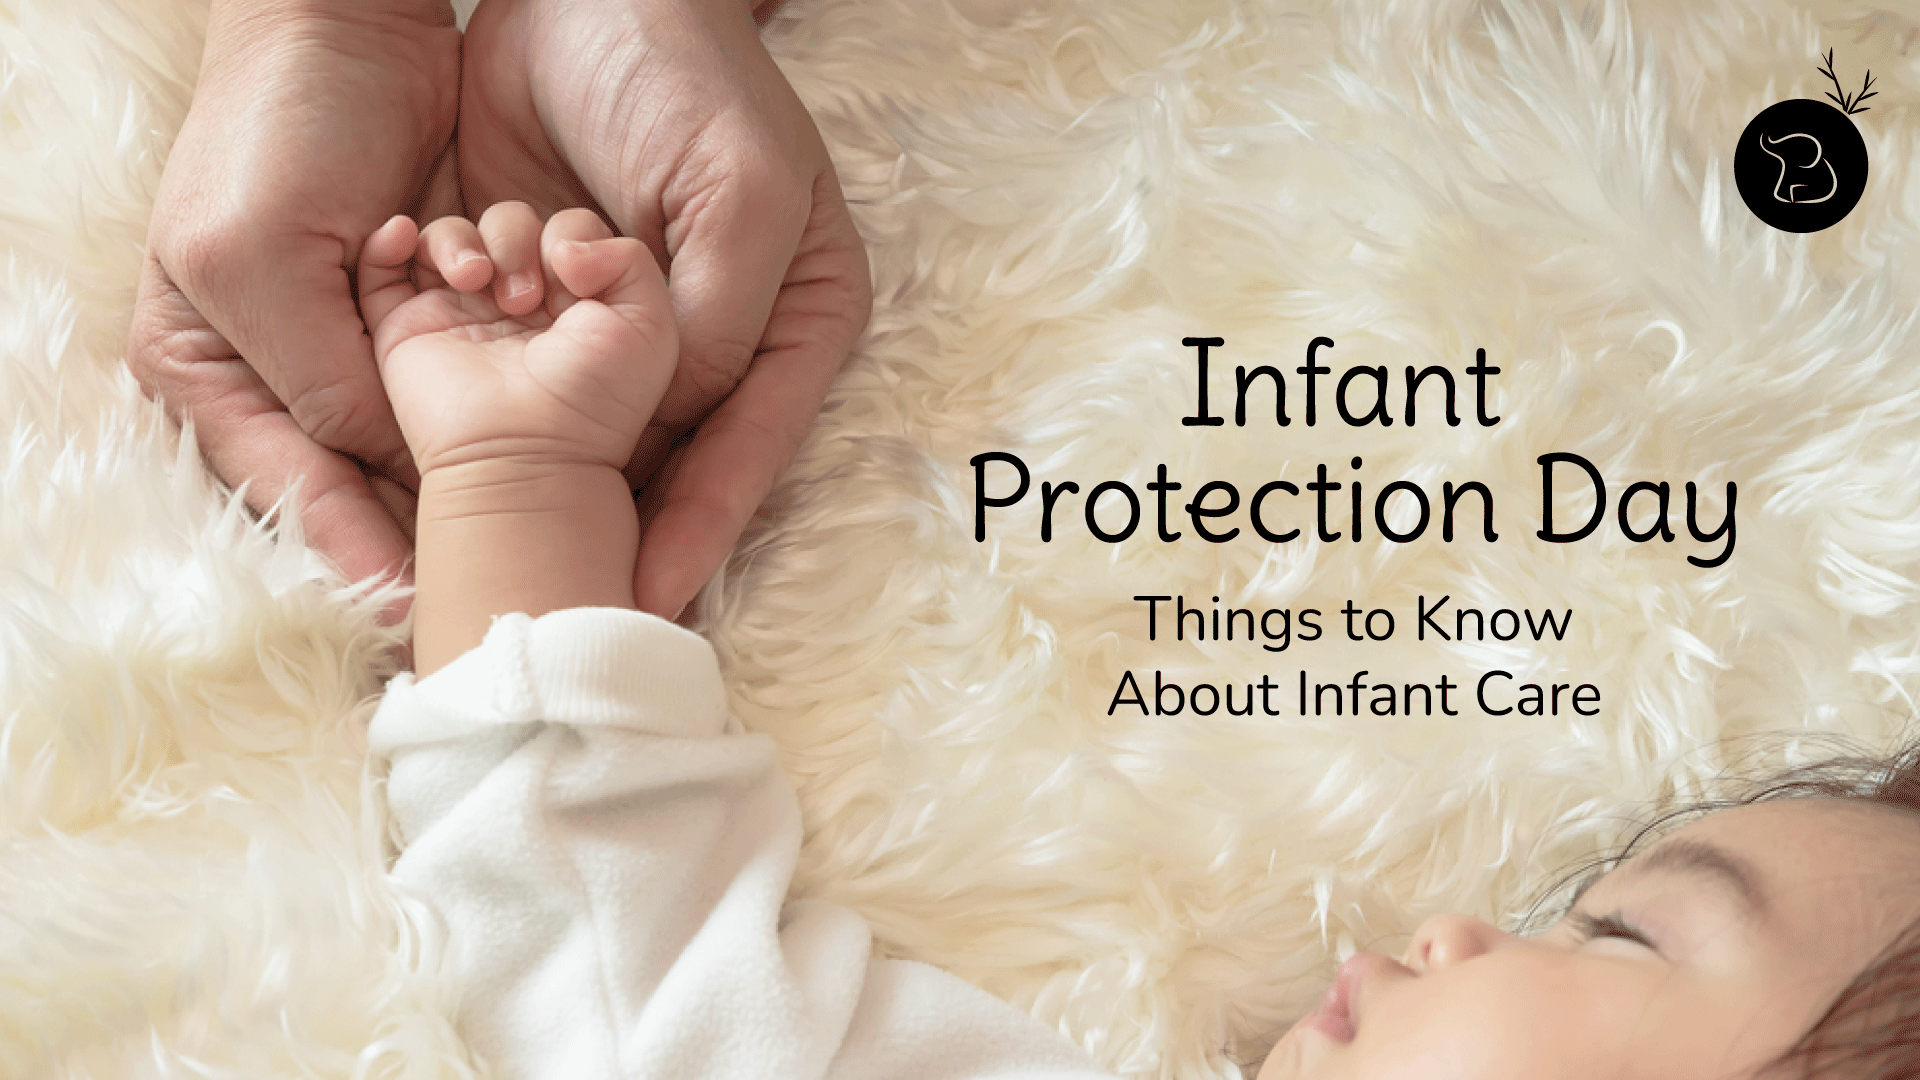 Infant Protection Day: Things to Know About Infant Care